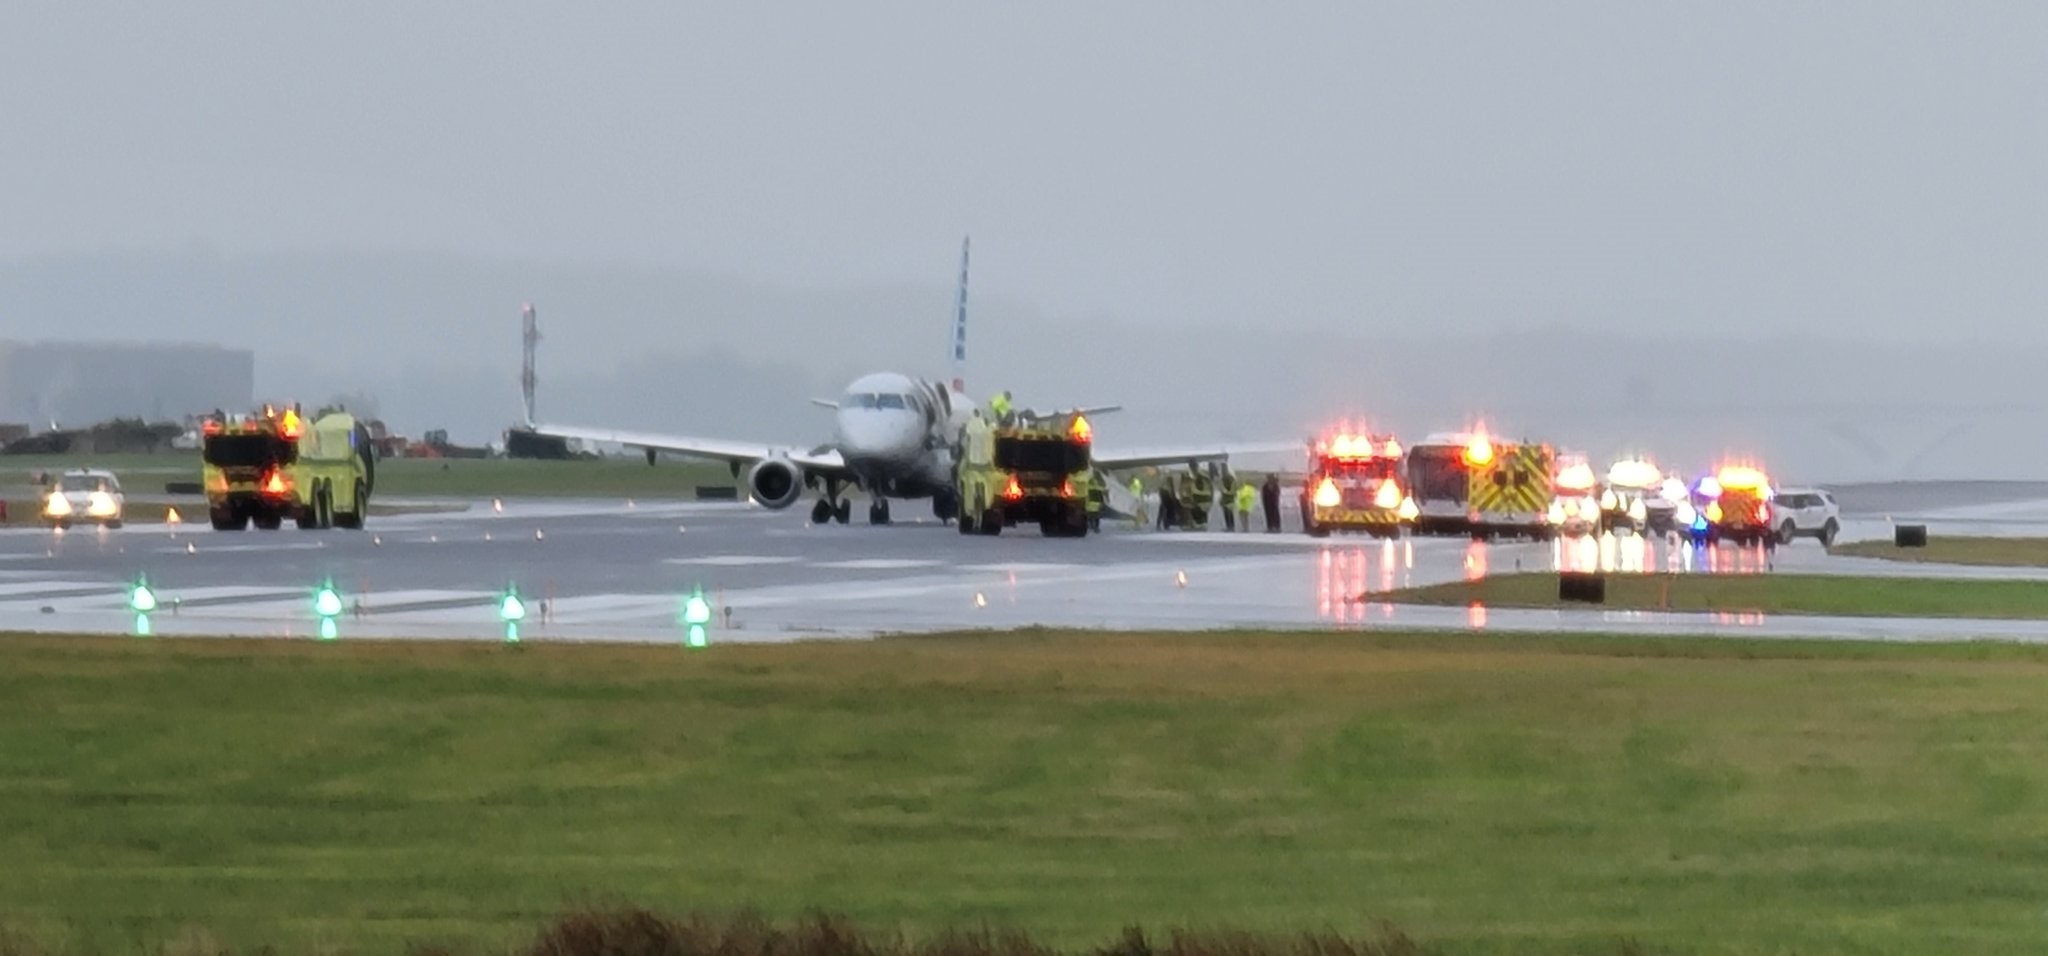 American Eagle (Republic Airways) Embraer E175LR aircraft (N404YX) blown a tire while suffering a hard landing at Ronald Reagan National Airport.